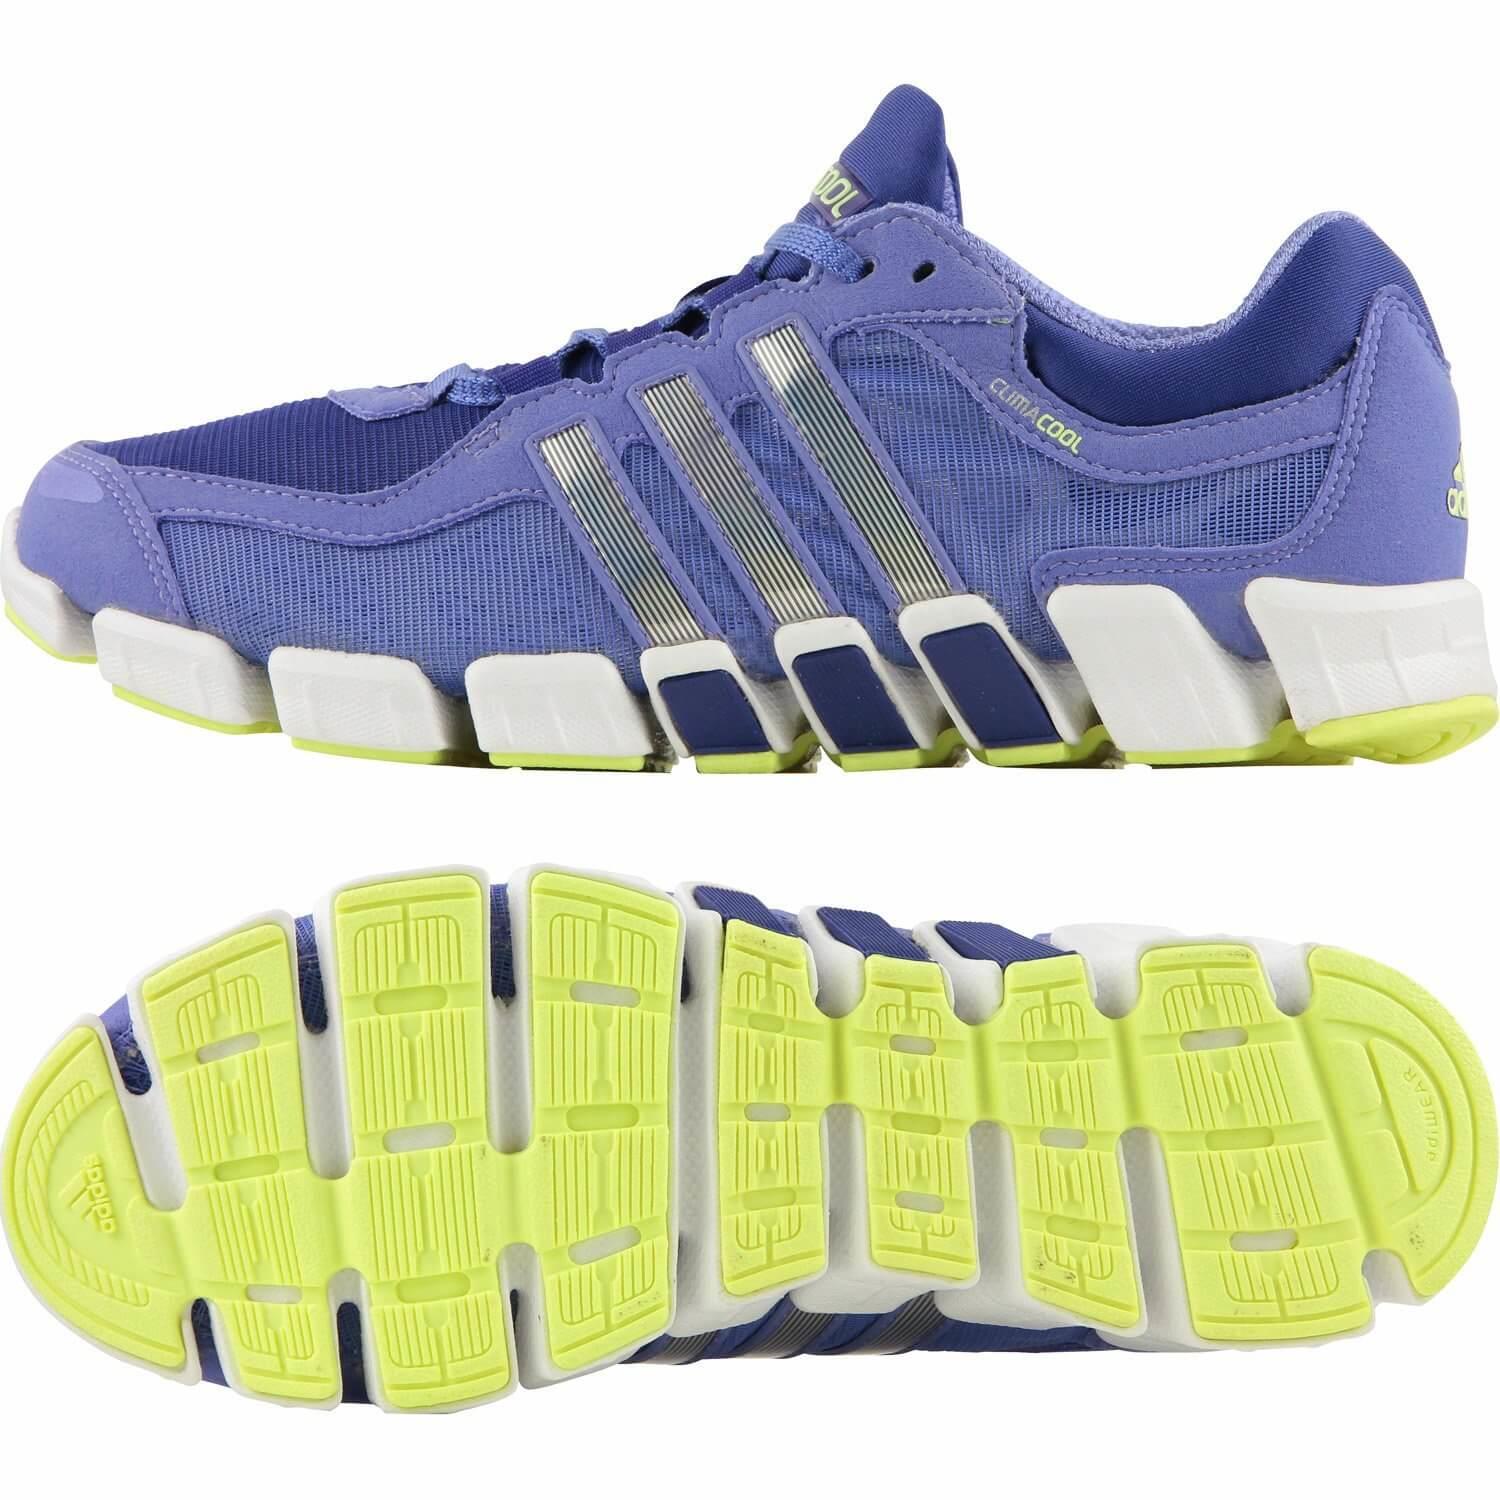 Bright and complimentary colors give the Adidas Climacool Freshride a stylish appearance